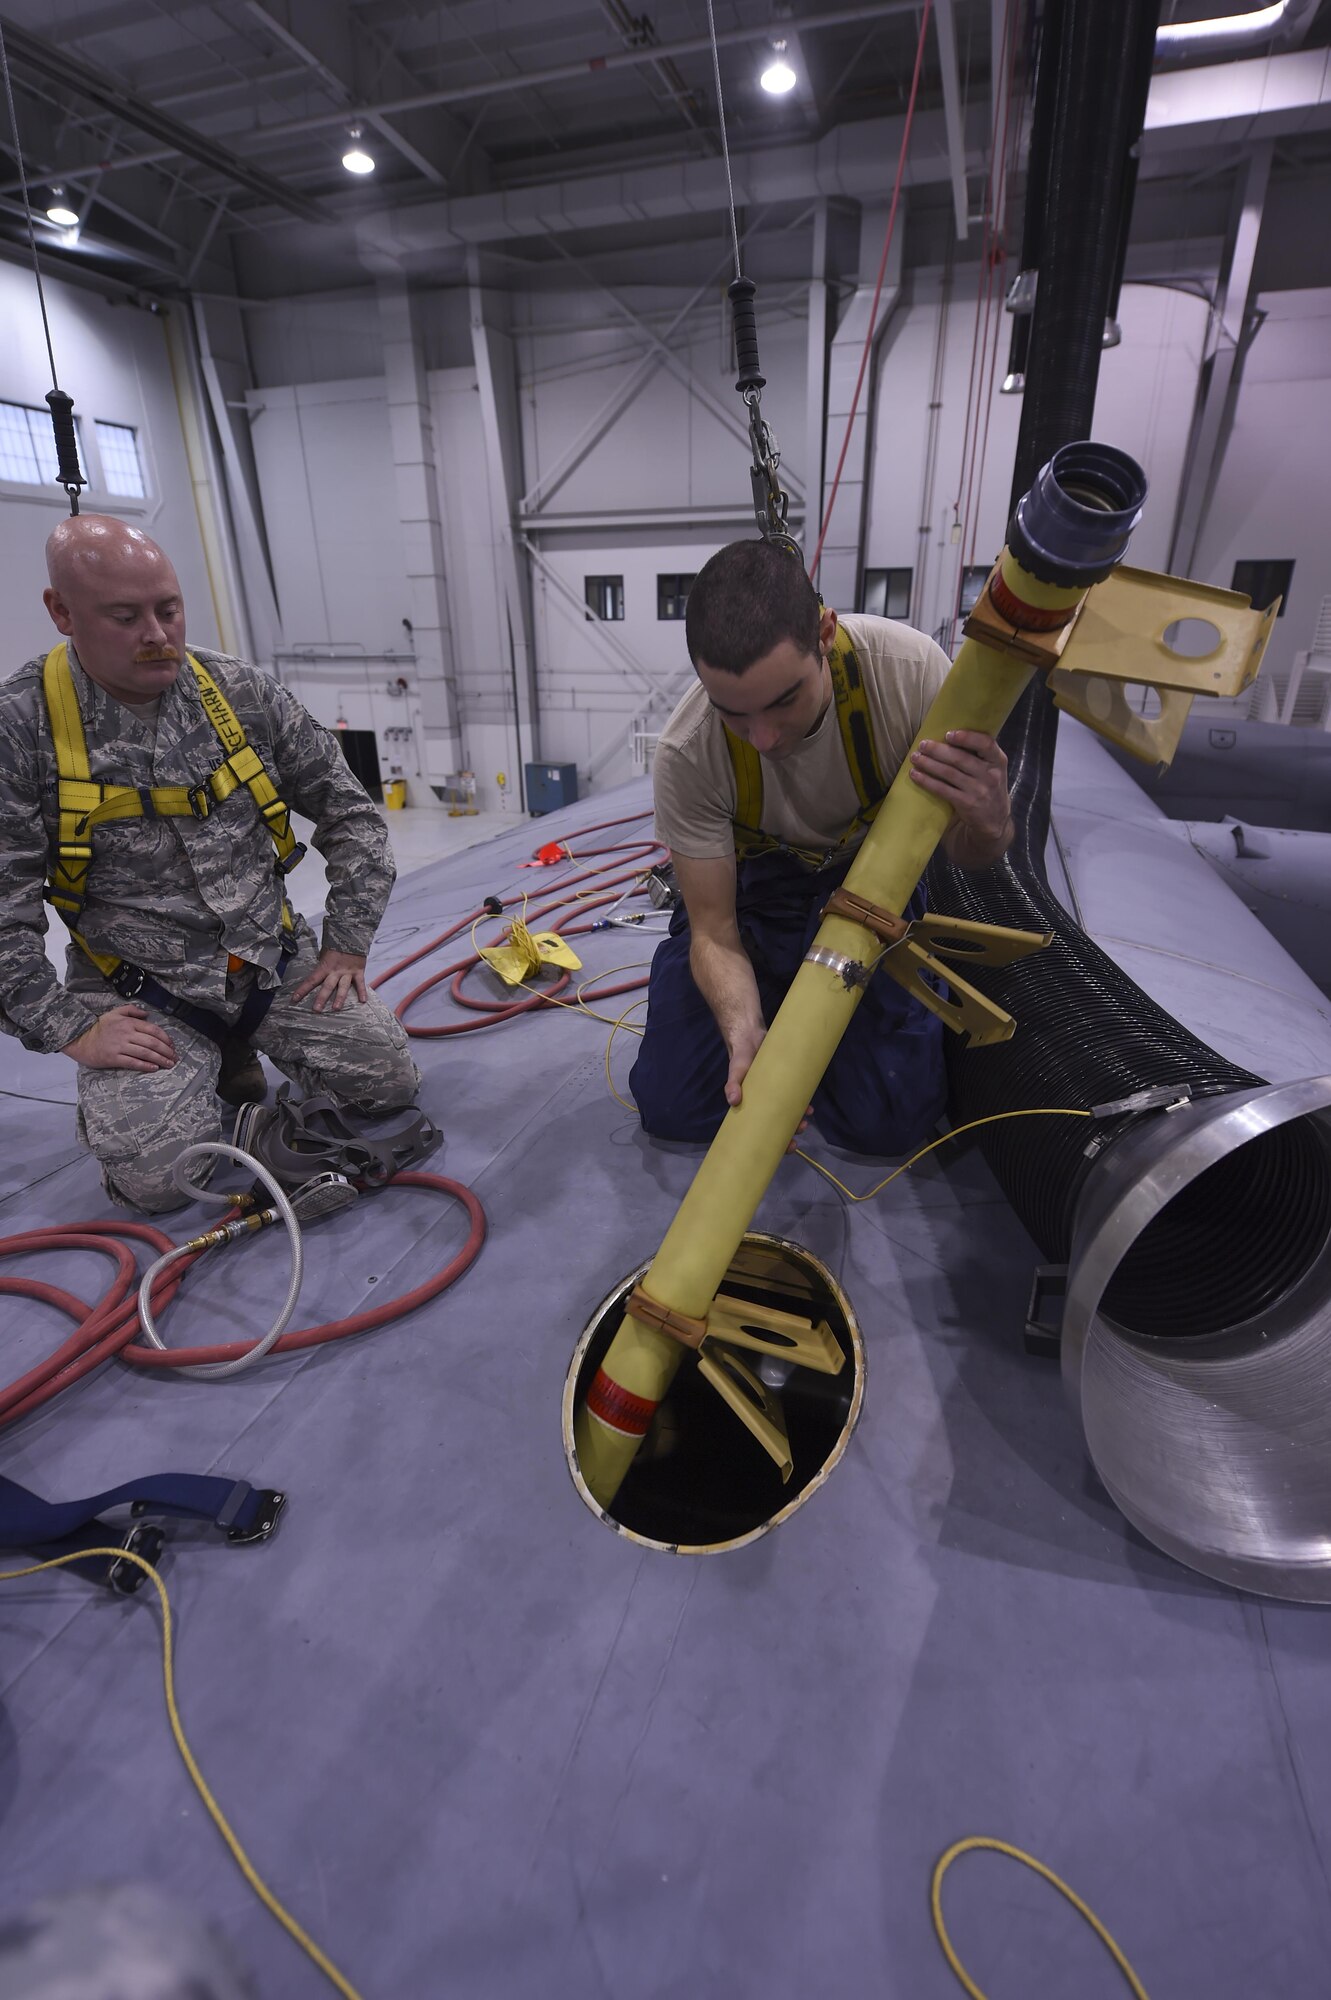 U.S. Air Force Staff Sgt. Jacobb Nordstrom, left, 19th Maintenance Squadron fuel systems repair craftsman, assists Senior Airman Craig Martin, 19th MXS fuel systems repair journeyman, install a refuel pipeline manifold on a C-130J fuel tank Dec. 5, 2016, in Hangar 232 on Little Rock Air Force Base, Ark. The 19th MXS fuel systems repair flight works on various fuel and water cell tanks. (U.S. Air Force photo/Senior Airman Harry Brexel)